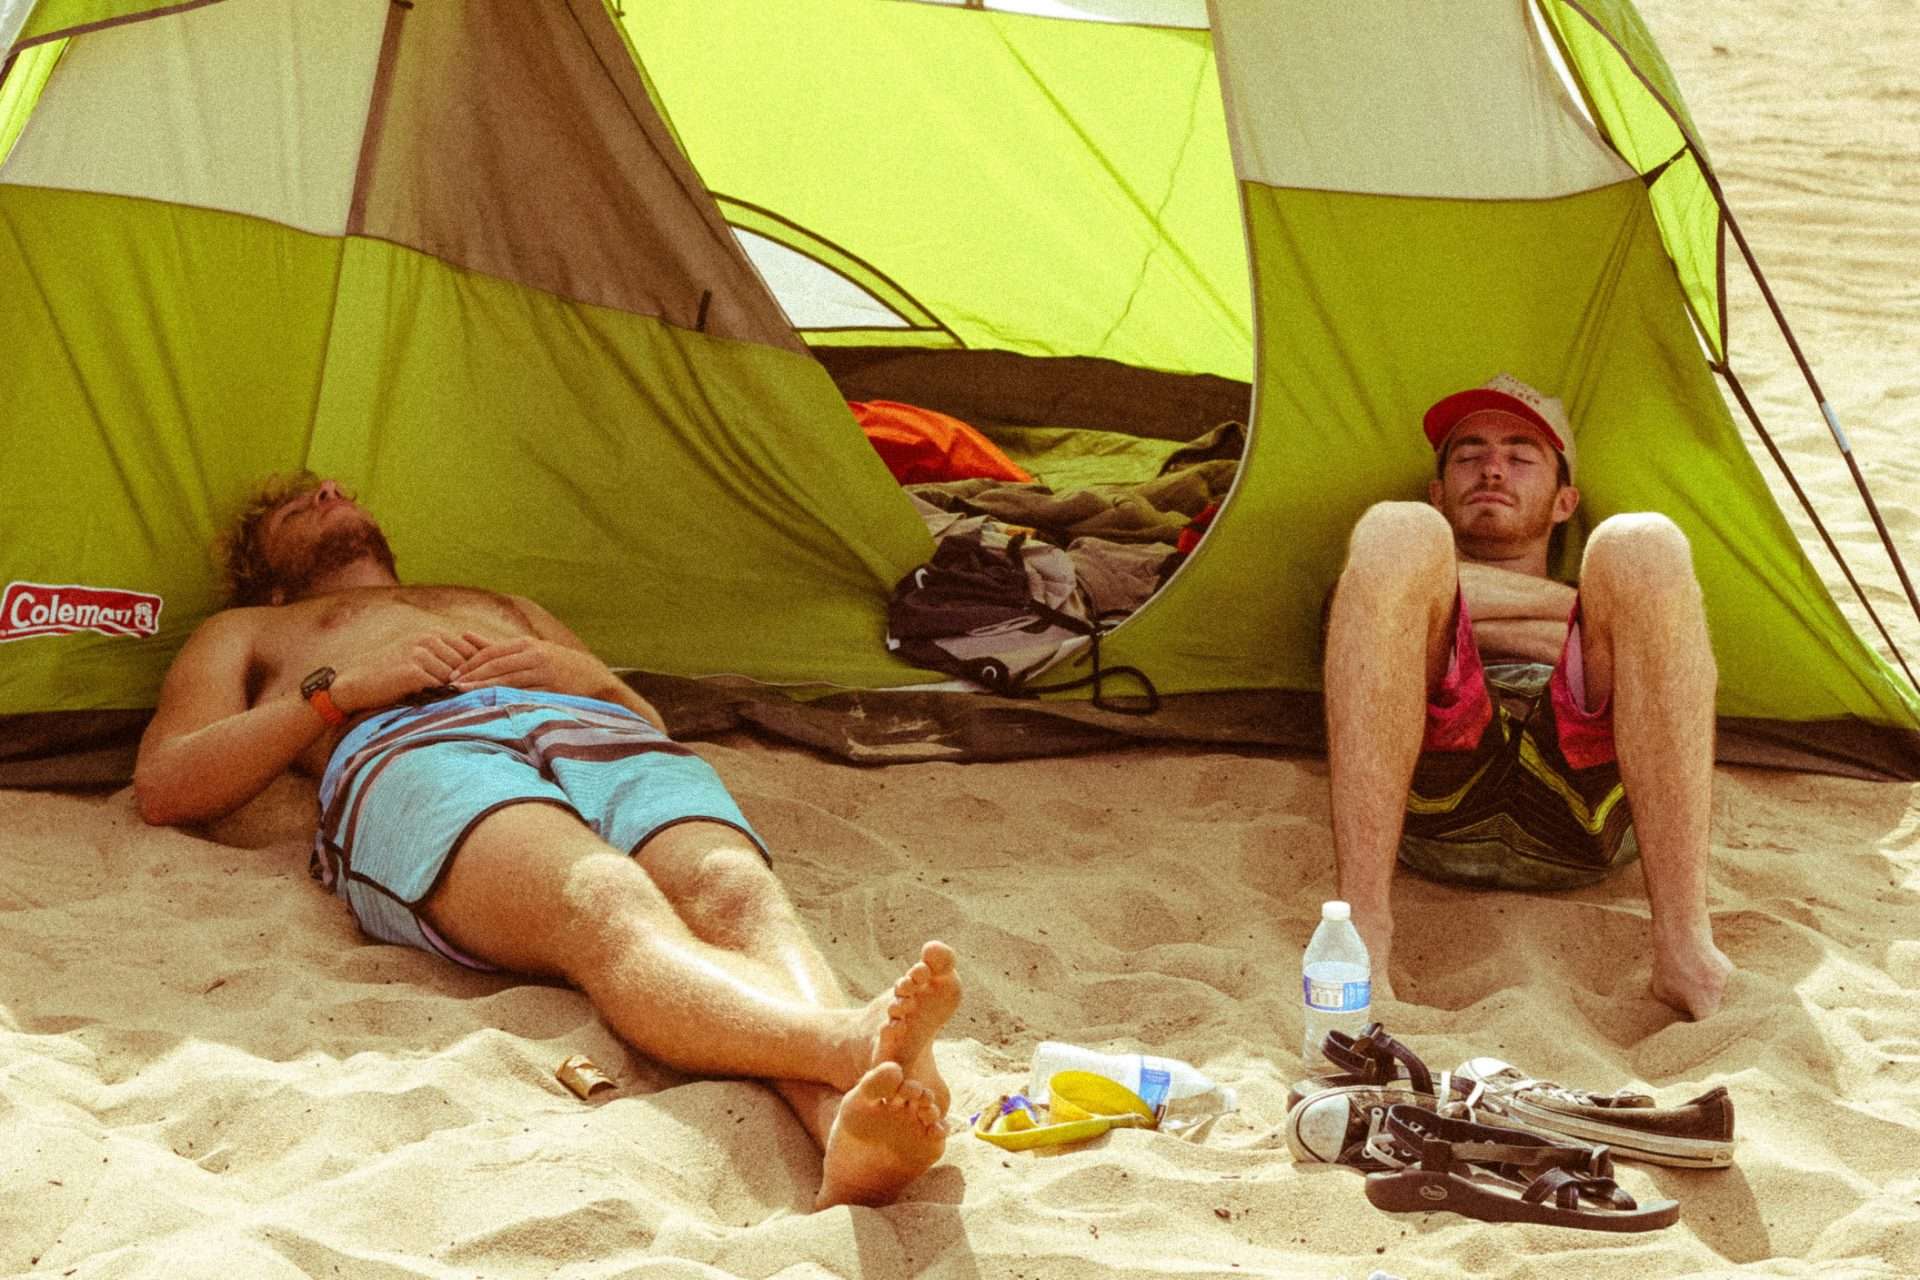 Two men camping on Pismo Beach